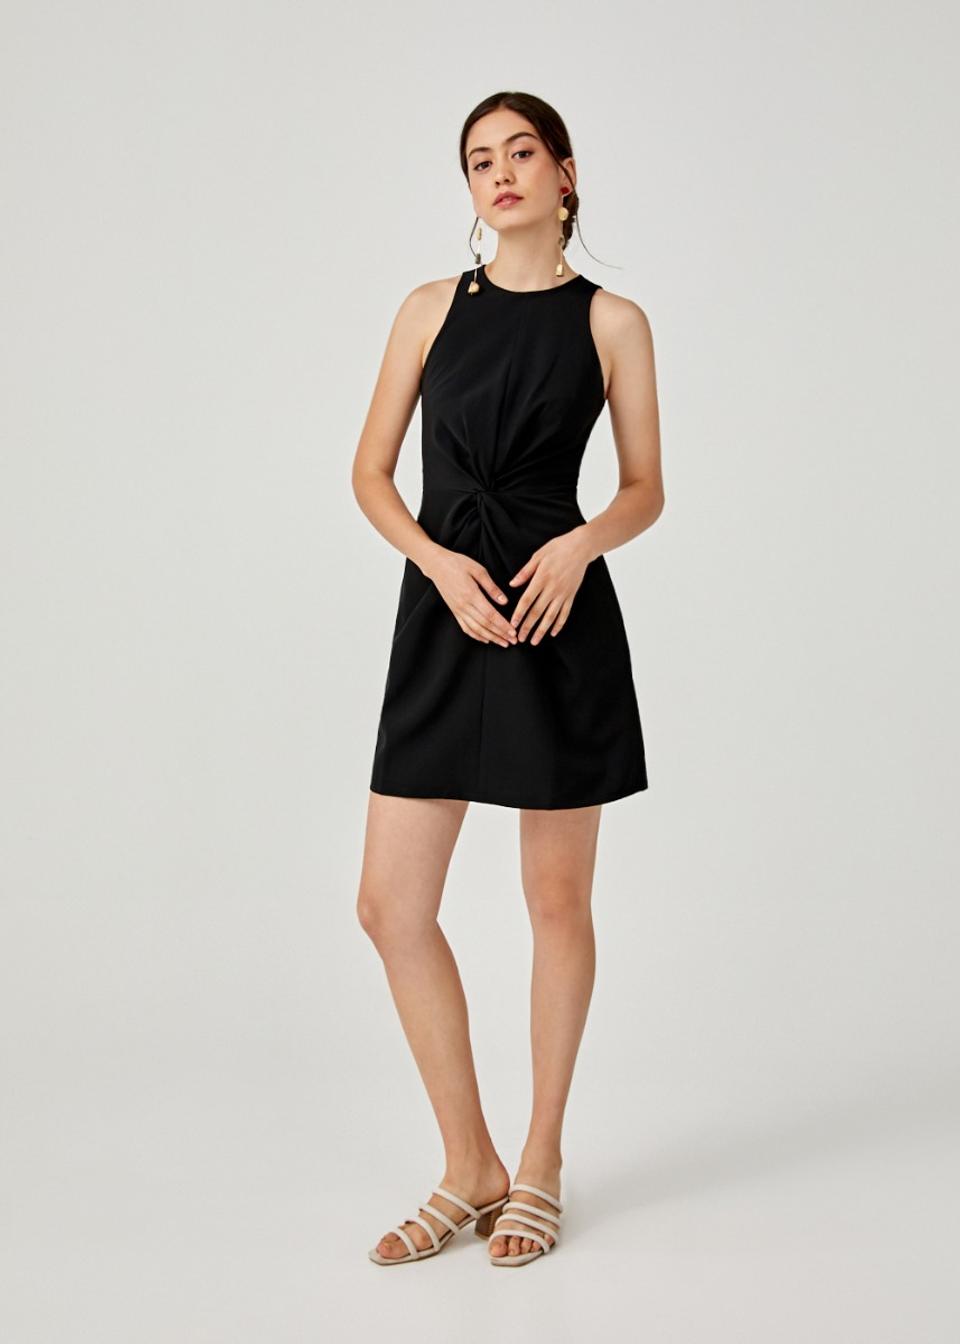 Buy Makenna Belted A-line Dress @ Love, Bonito Singapore